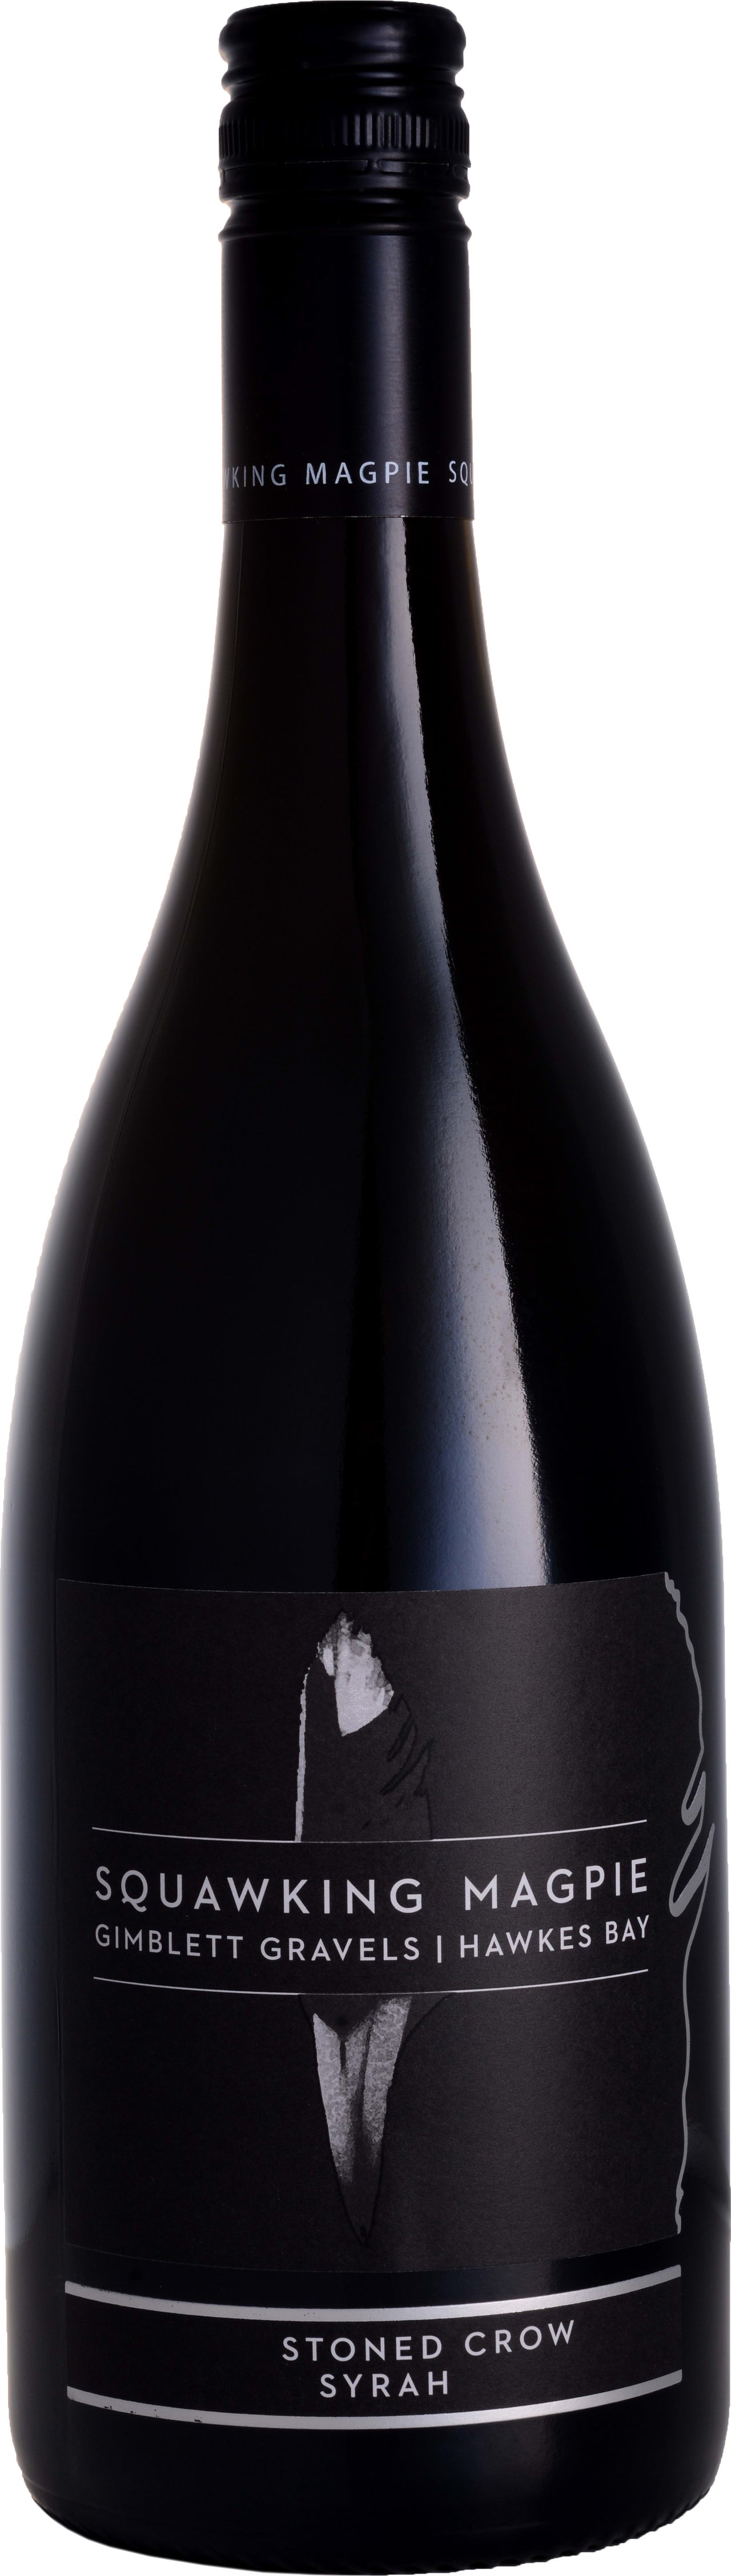 Squawking Magpie 2015 Stoned Crow Syrah, Squawking Magpie 2015 75cl - Buy Squawking Magpie Wines from GREAT WINES DIRECT wine shop